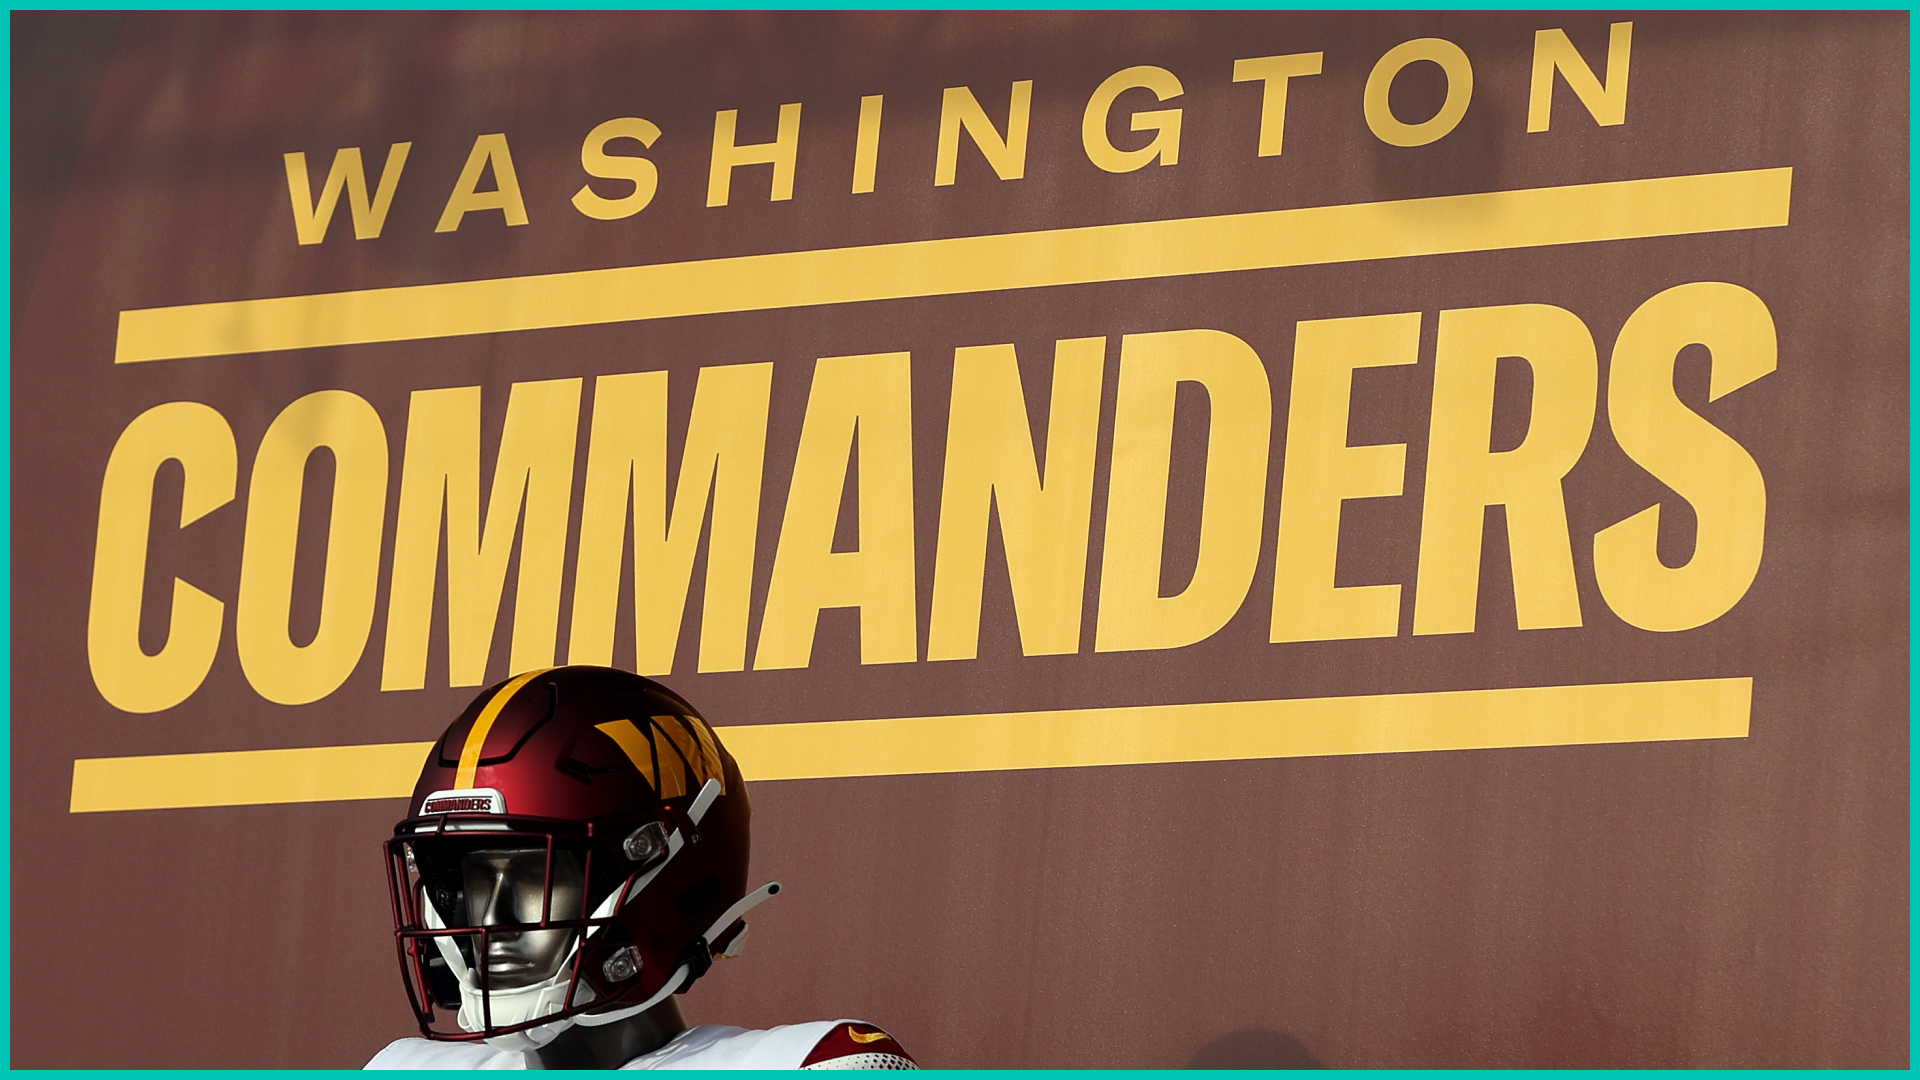 The Washington Commanders: What To Know About the Football Team's New Name